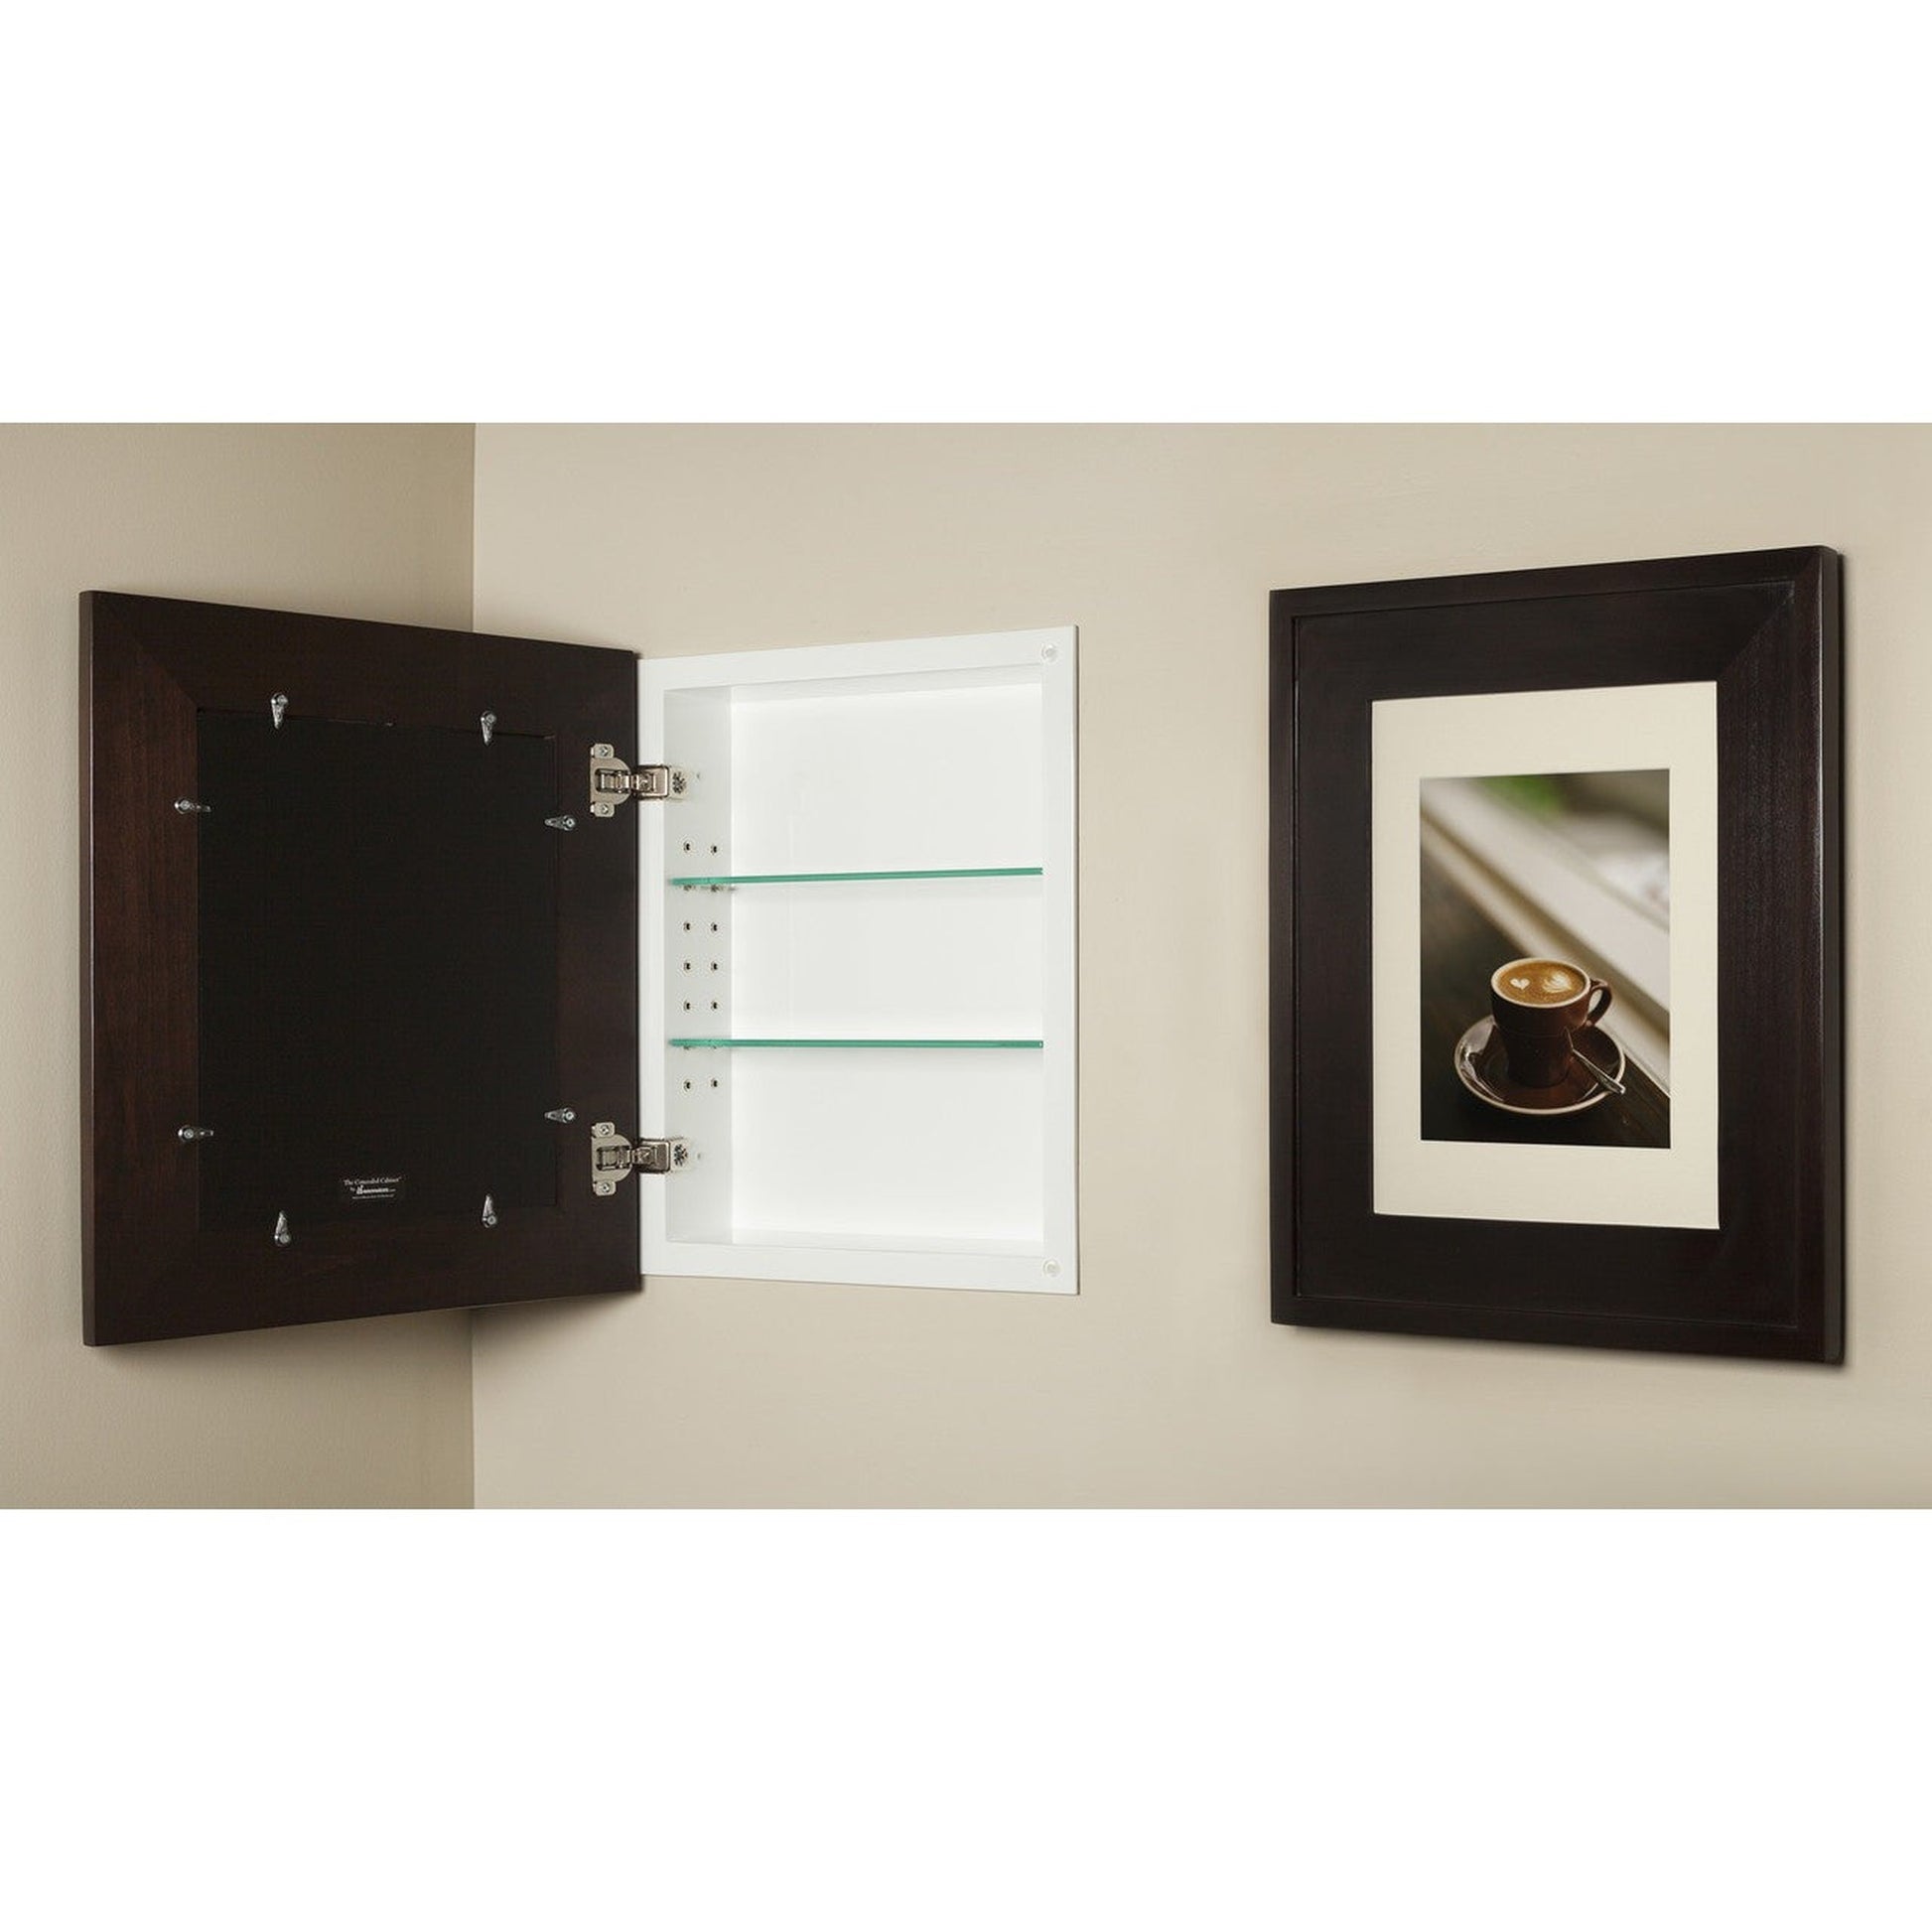 Fox Hollow Furnishings 14" x 16" Coffee Bean Regular Special 3" Depth Recessed Picture Frame Medicine Cabinet With Mirror